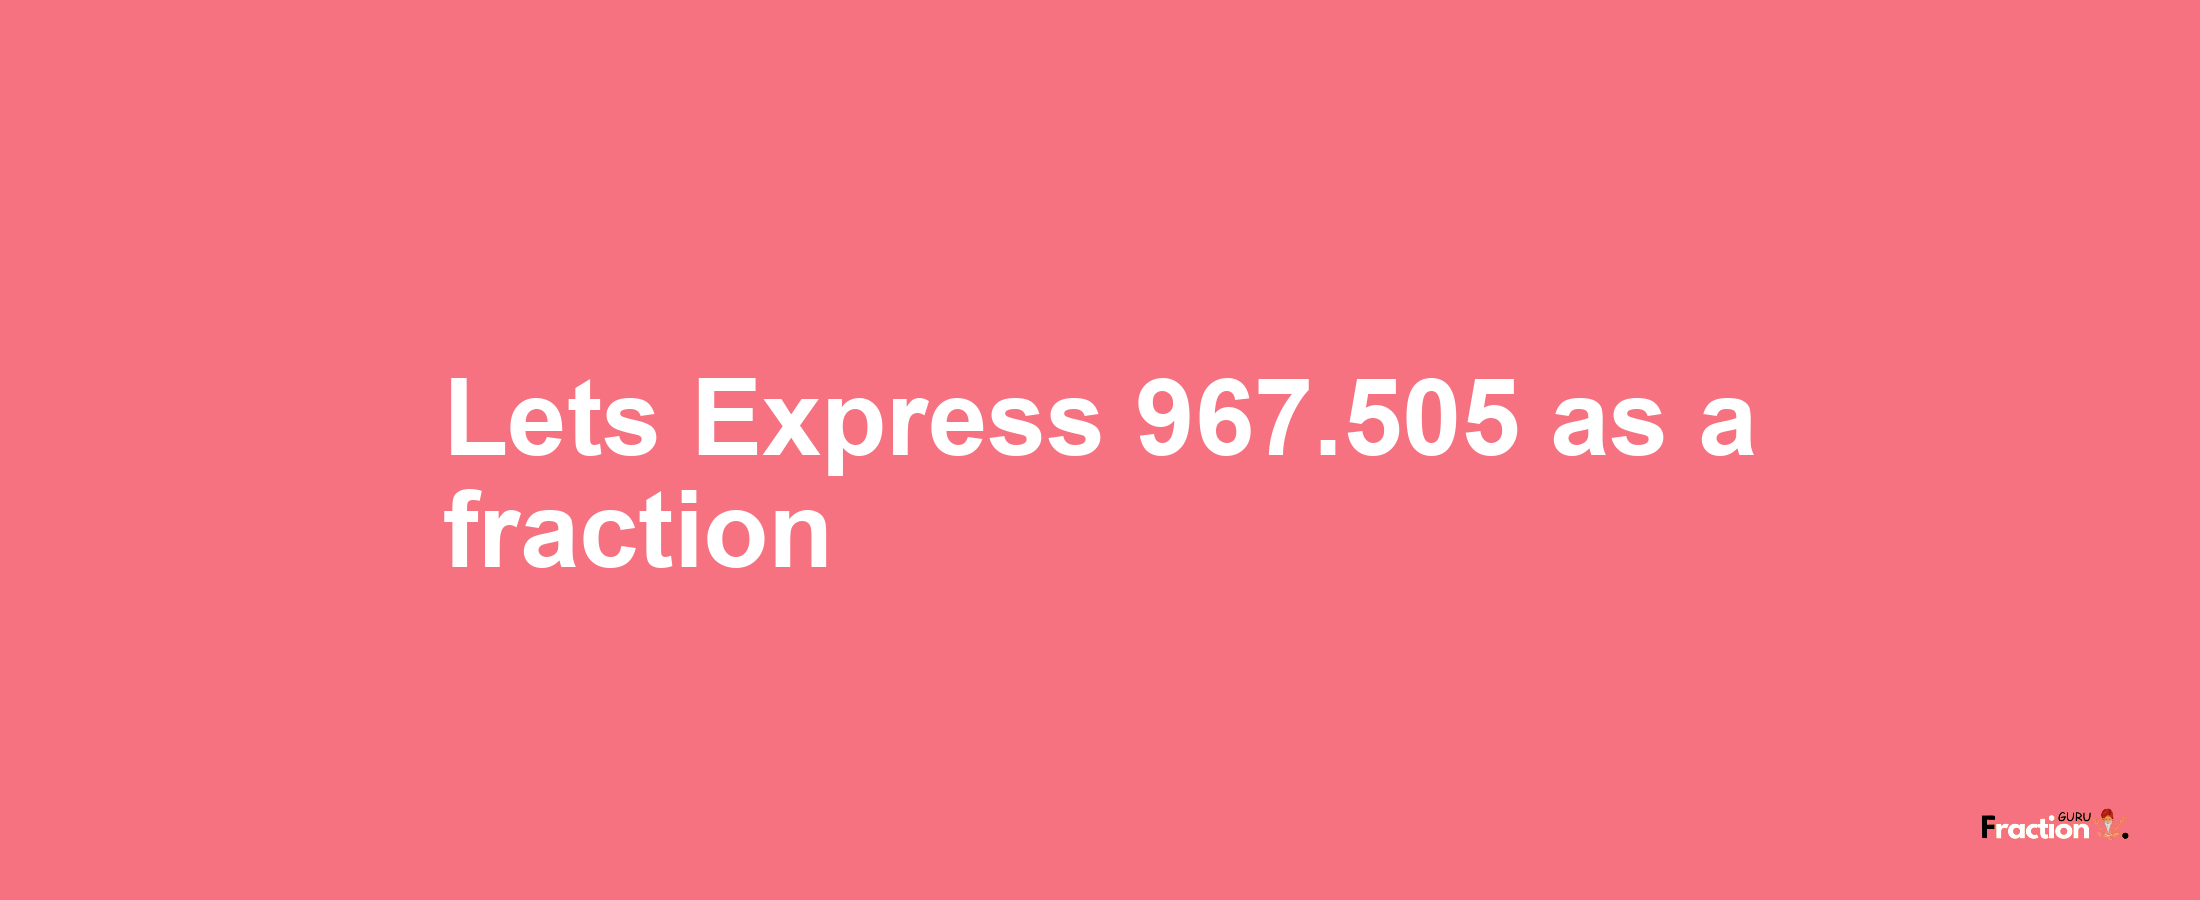 Lets Express 967.505 as afraction